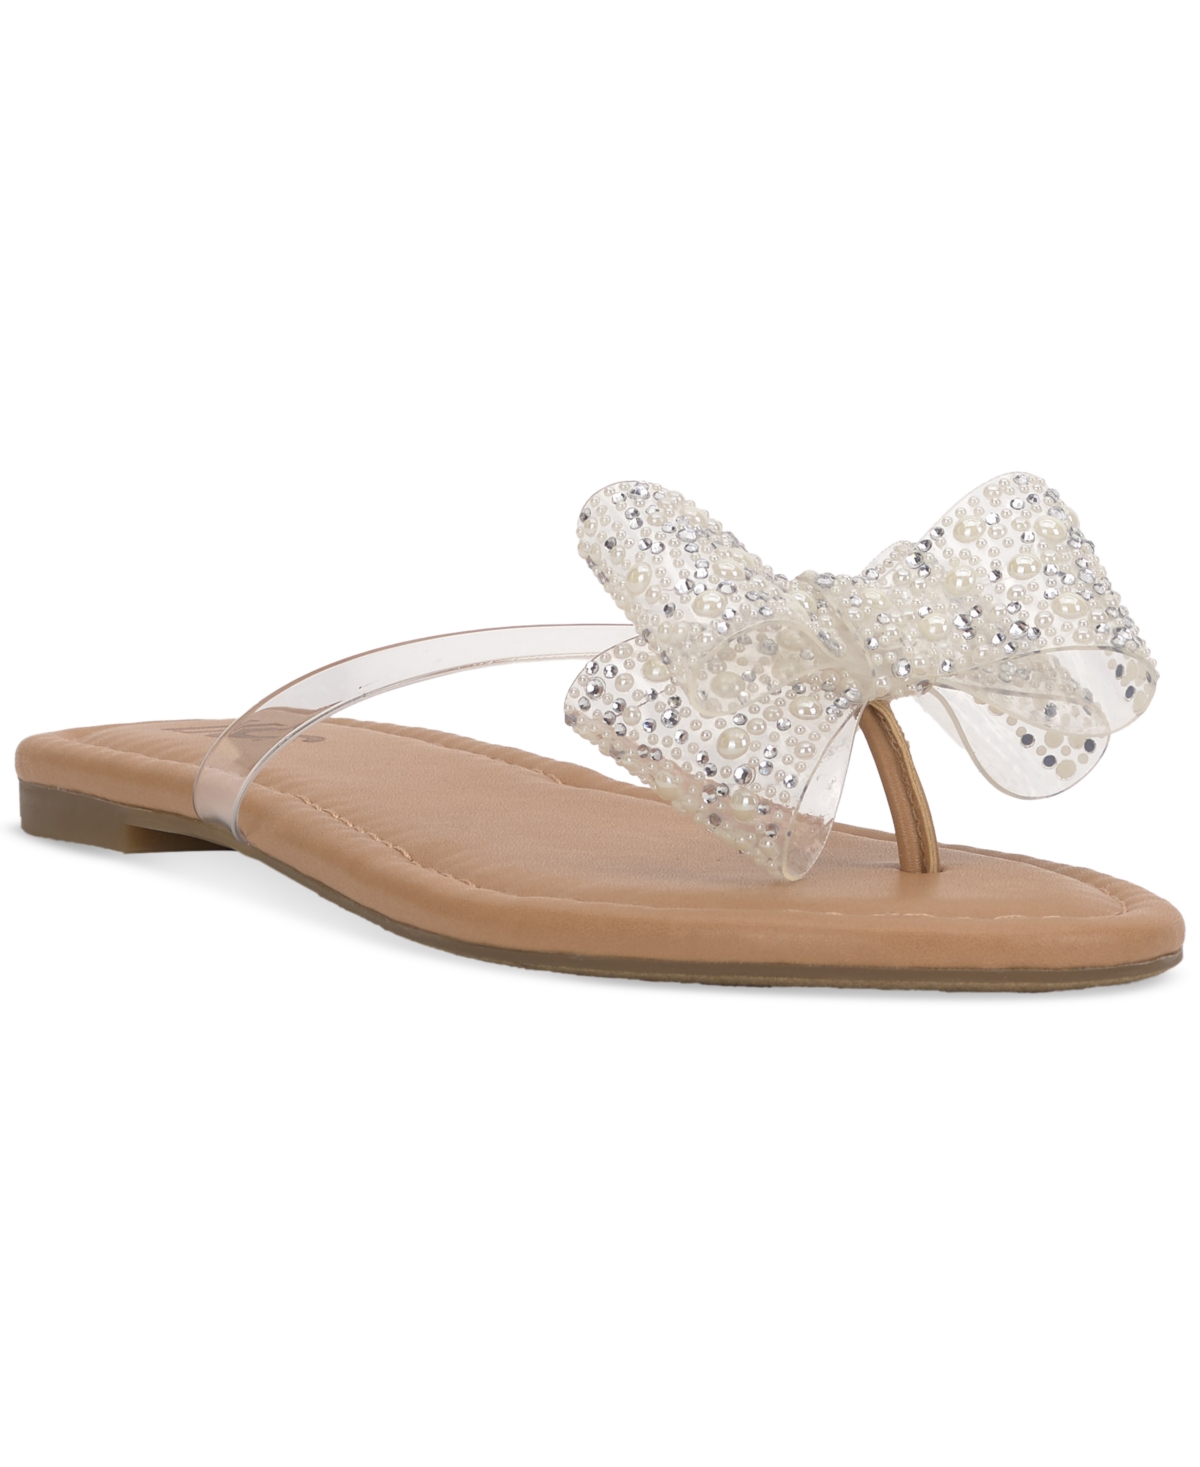 Women's Mabae Bow Flat Sandals, Created for Macy's - Silver Bling